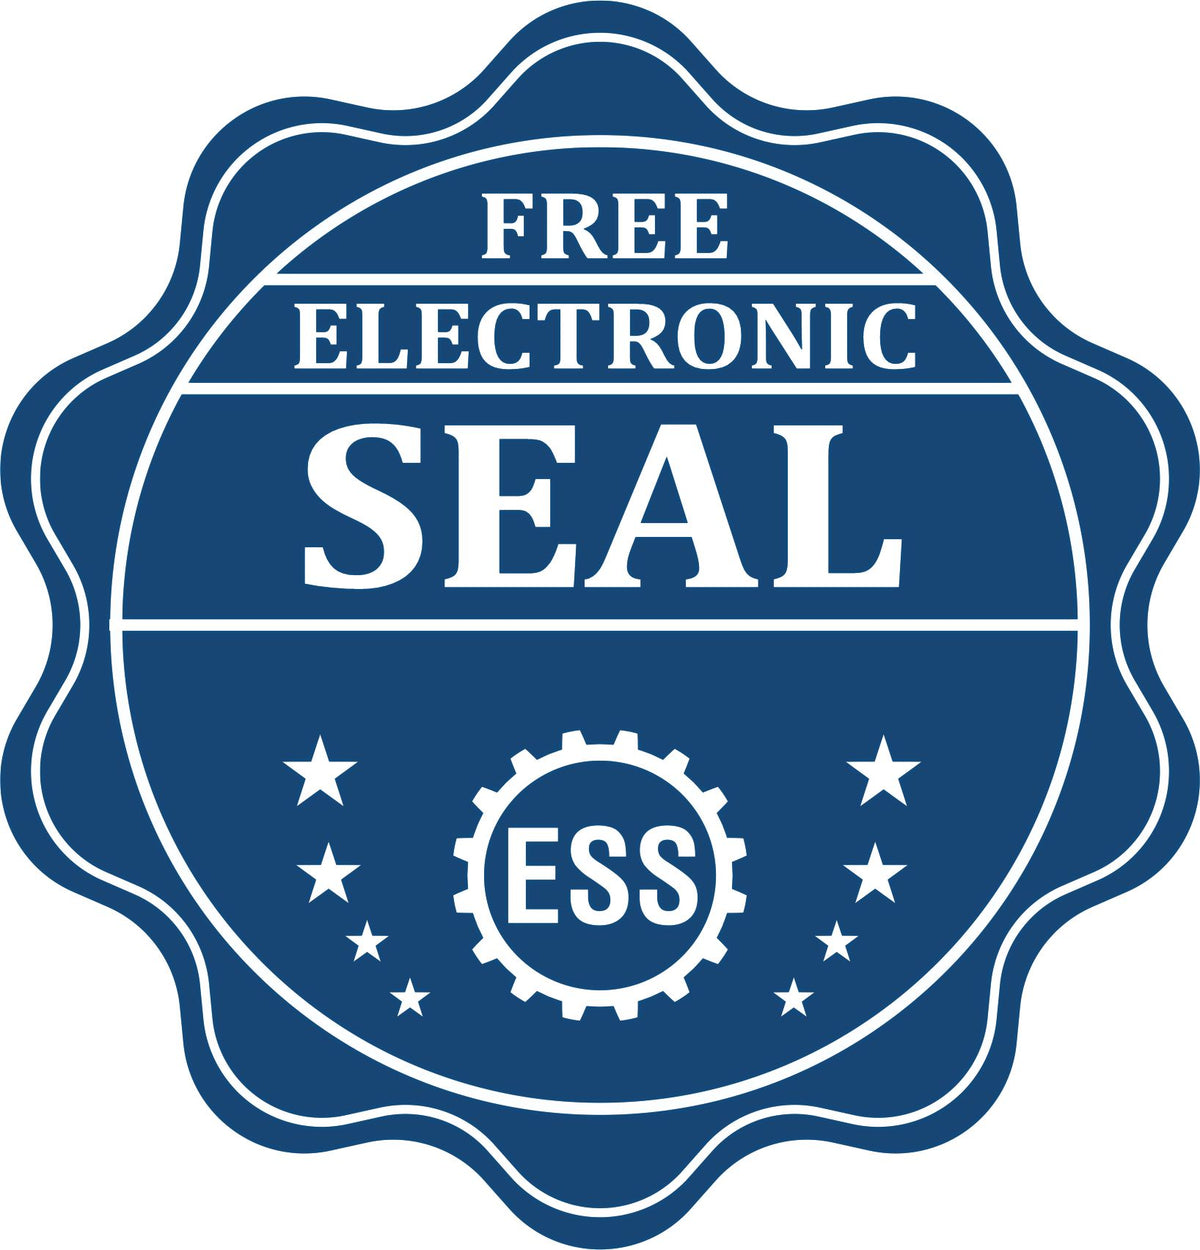 A badge showing a free electronic seal for the Heavy Duty Cast Iron Indiana Architect Embosser with stars and the ESS gear on the emblem.